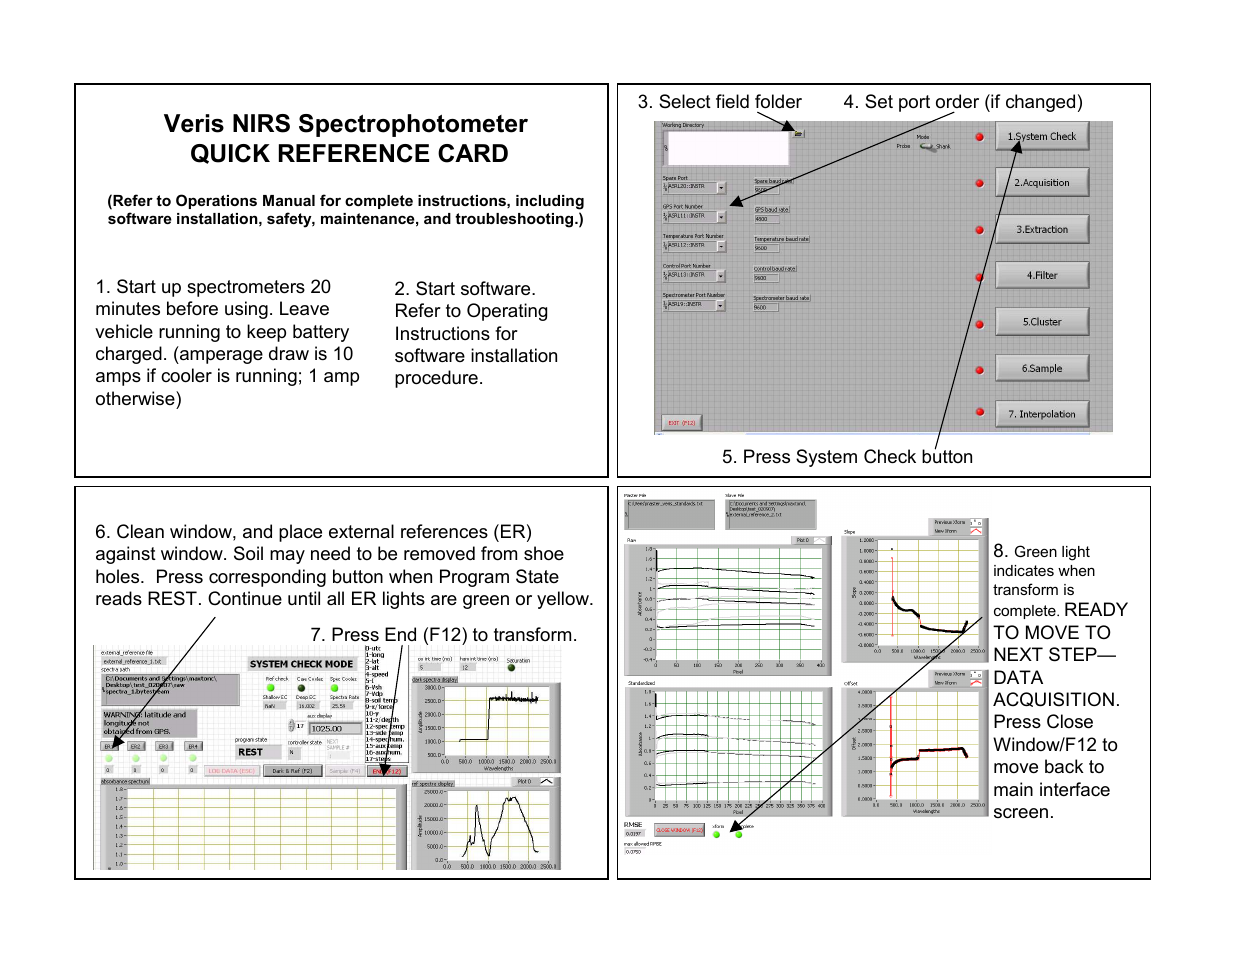 NIRS Spectrophotometer - QUICK REFERENCE CARD